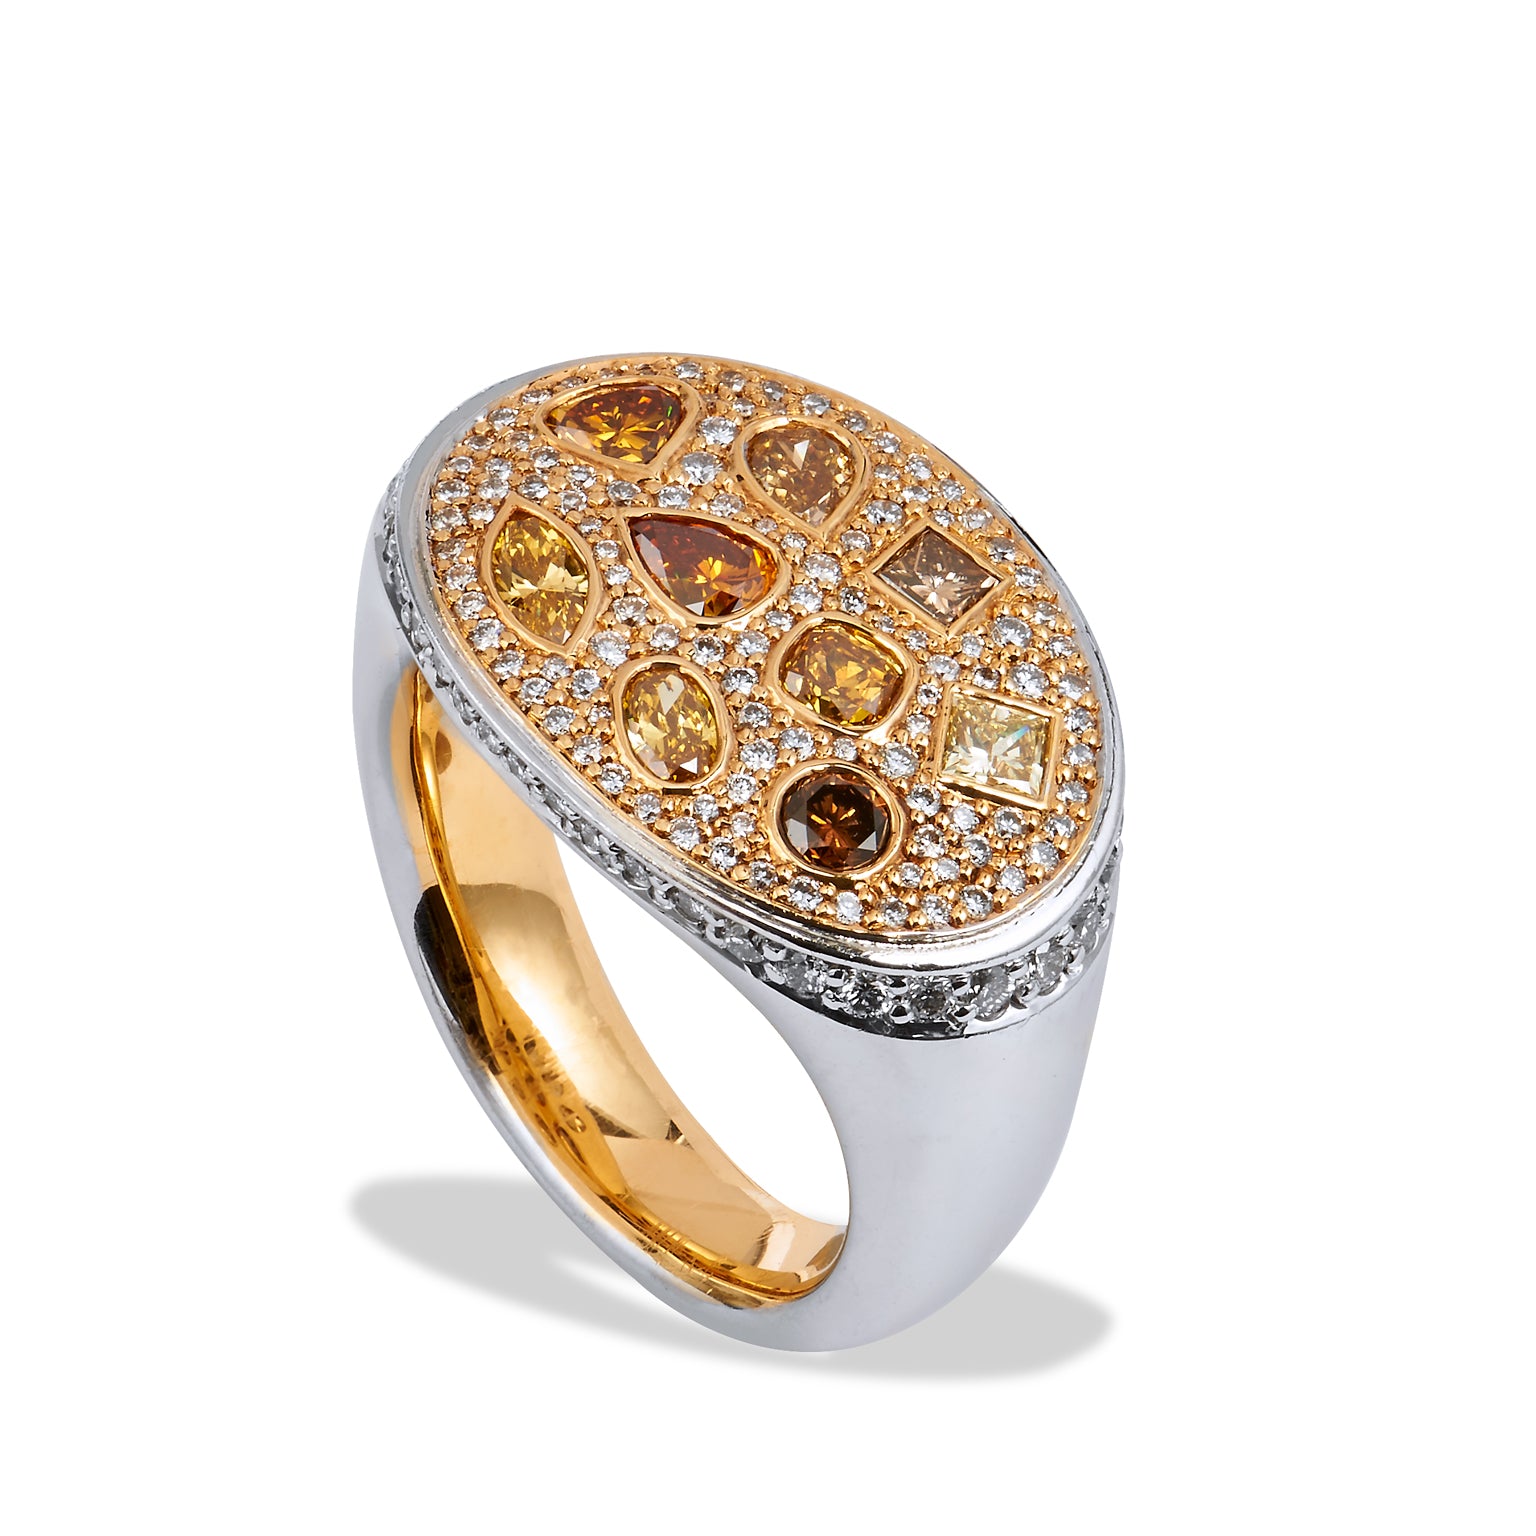 Hans D. Krieger Color Diamond Ring Rings Curated by H